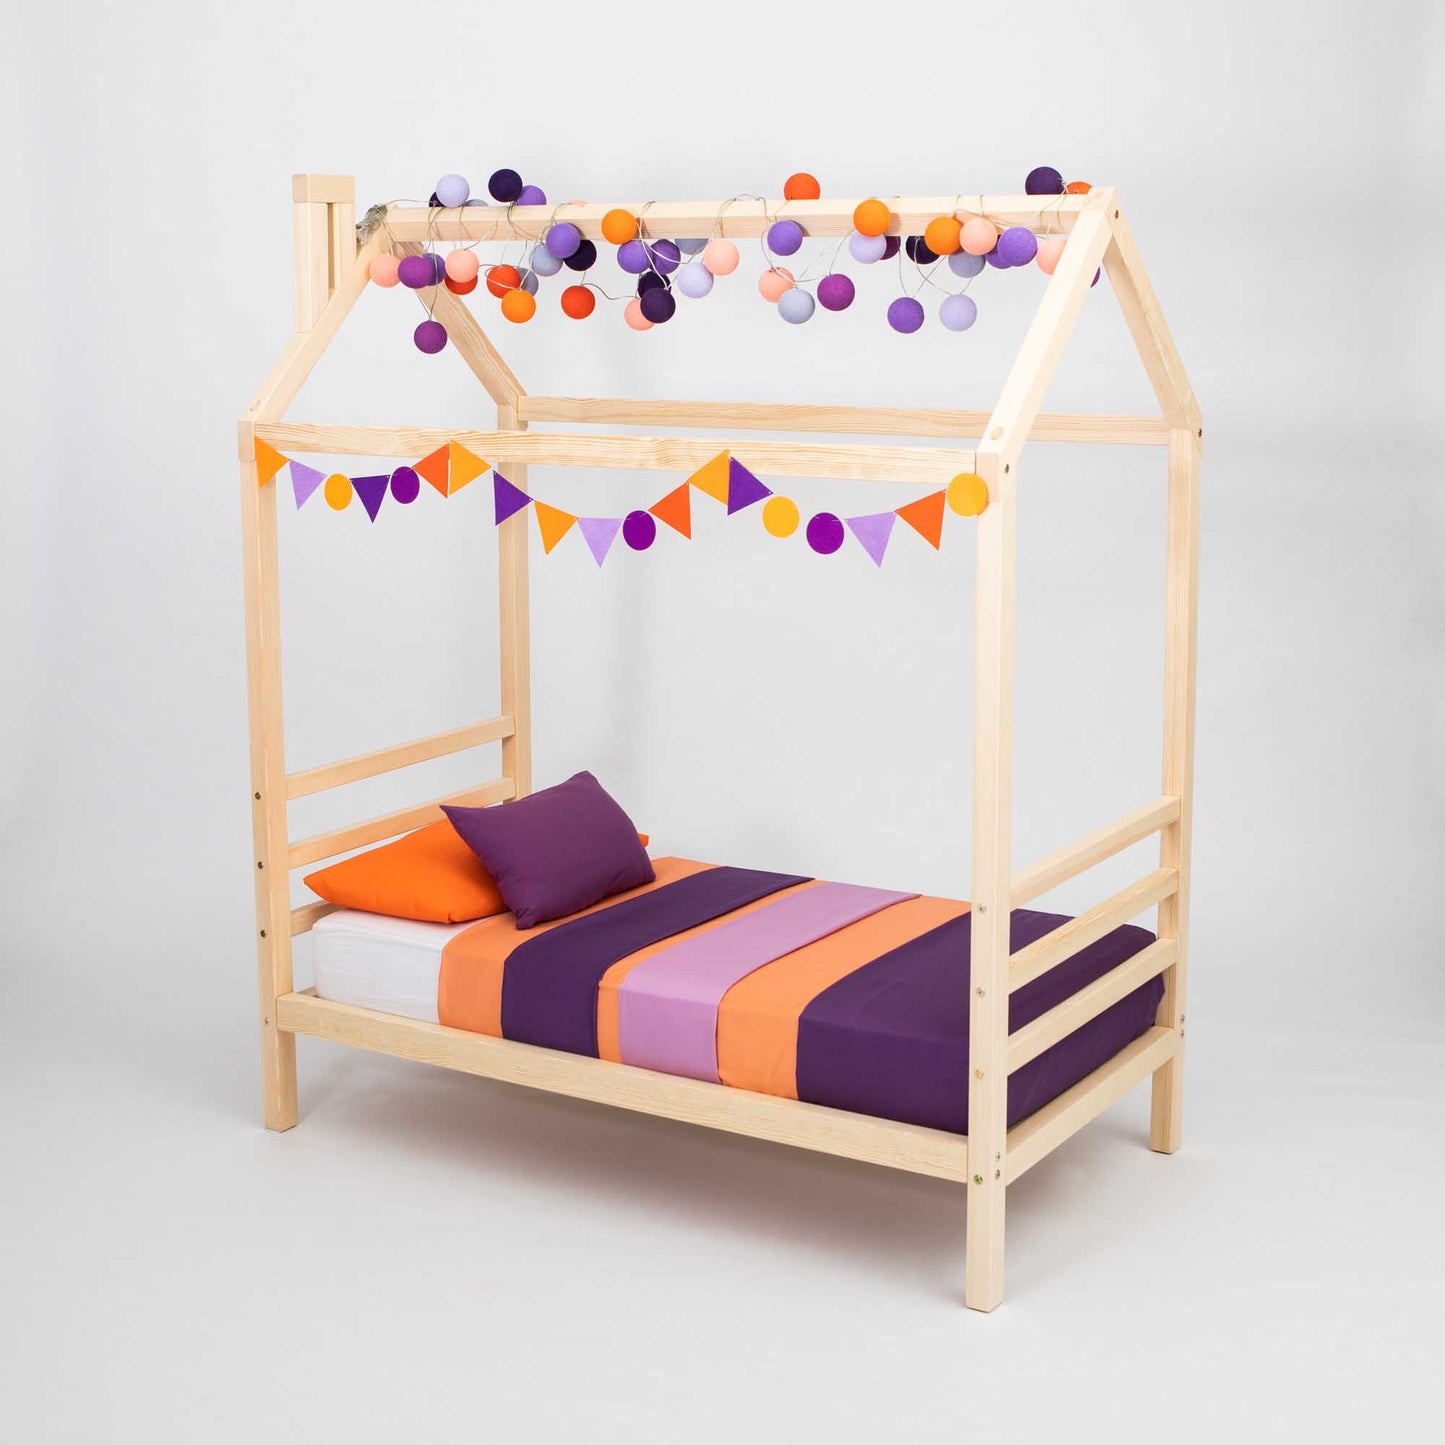 A Kids' house bed on legs with a headboard and footboard with purple and orange pom poms hanging from the ceiling.